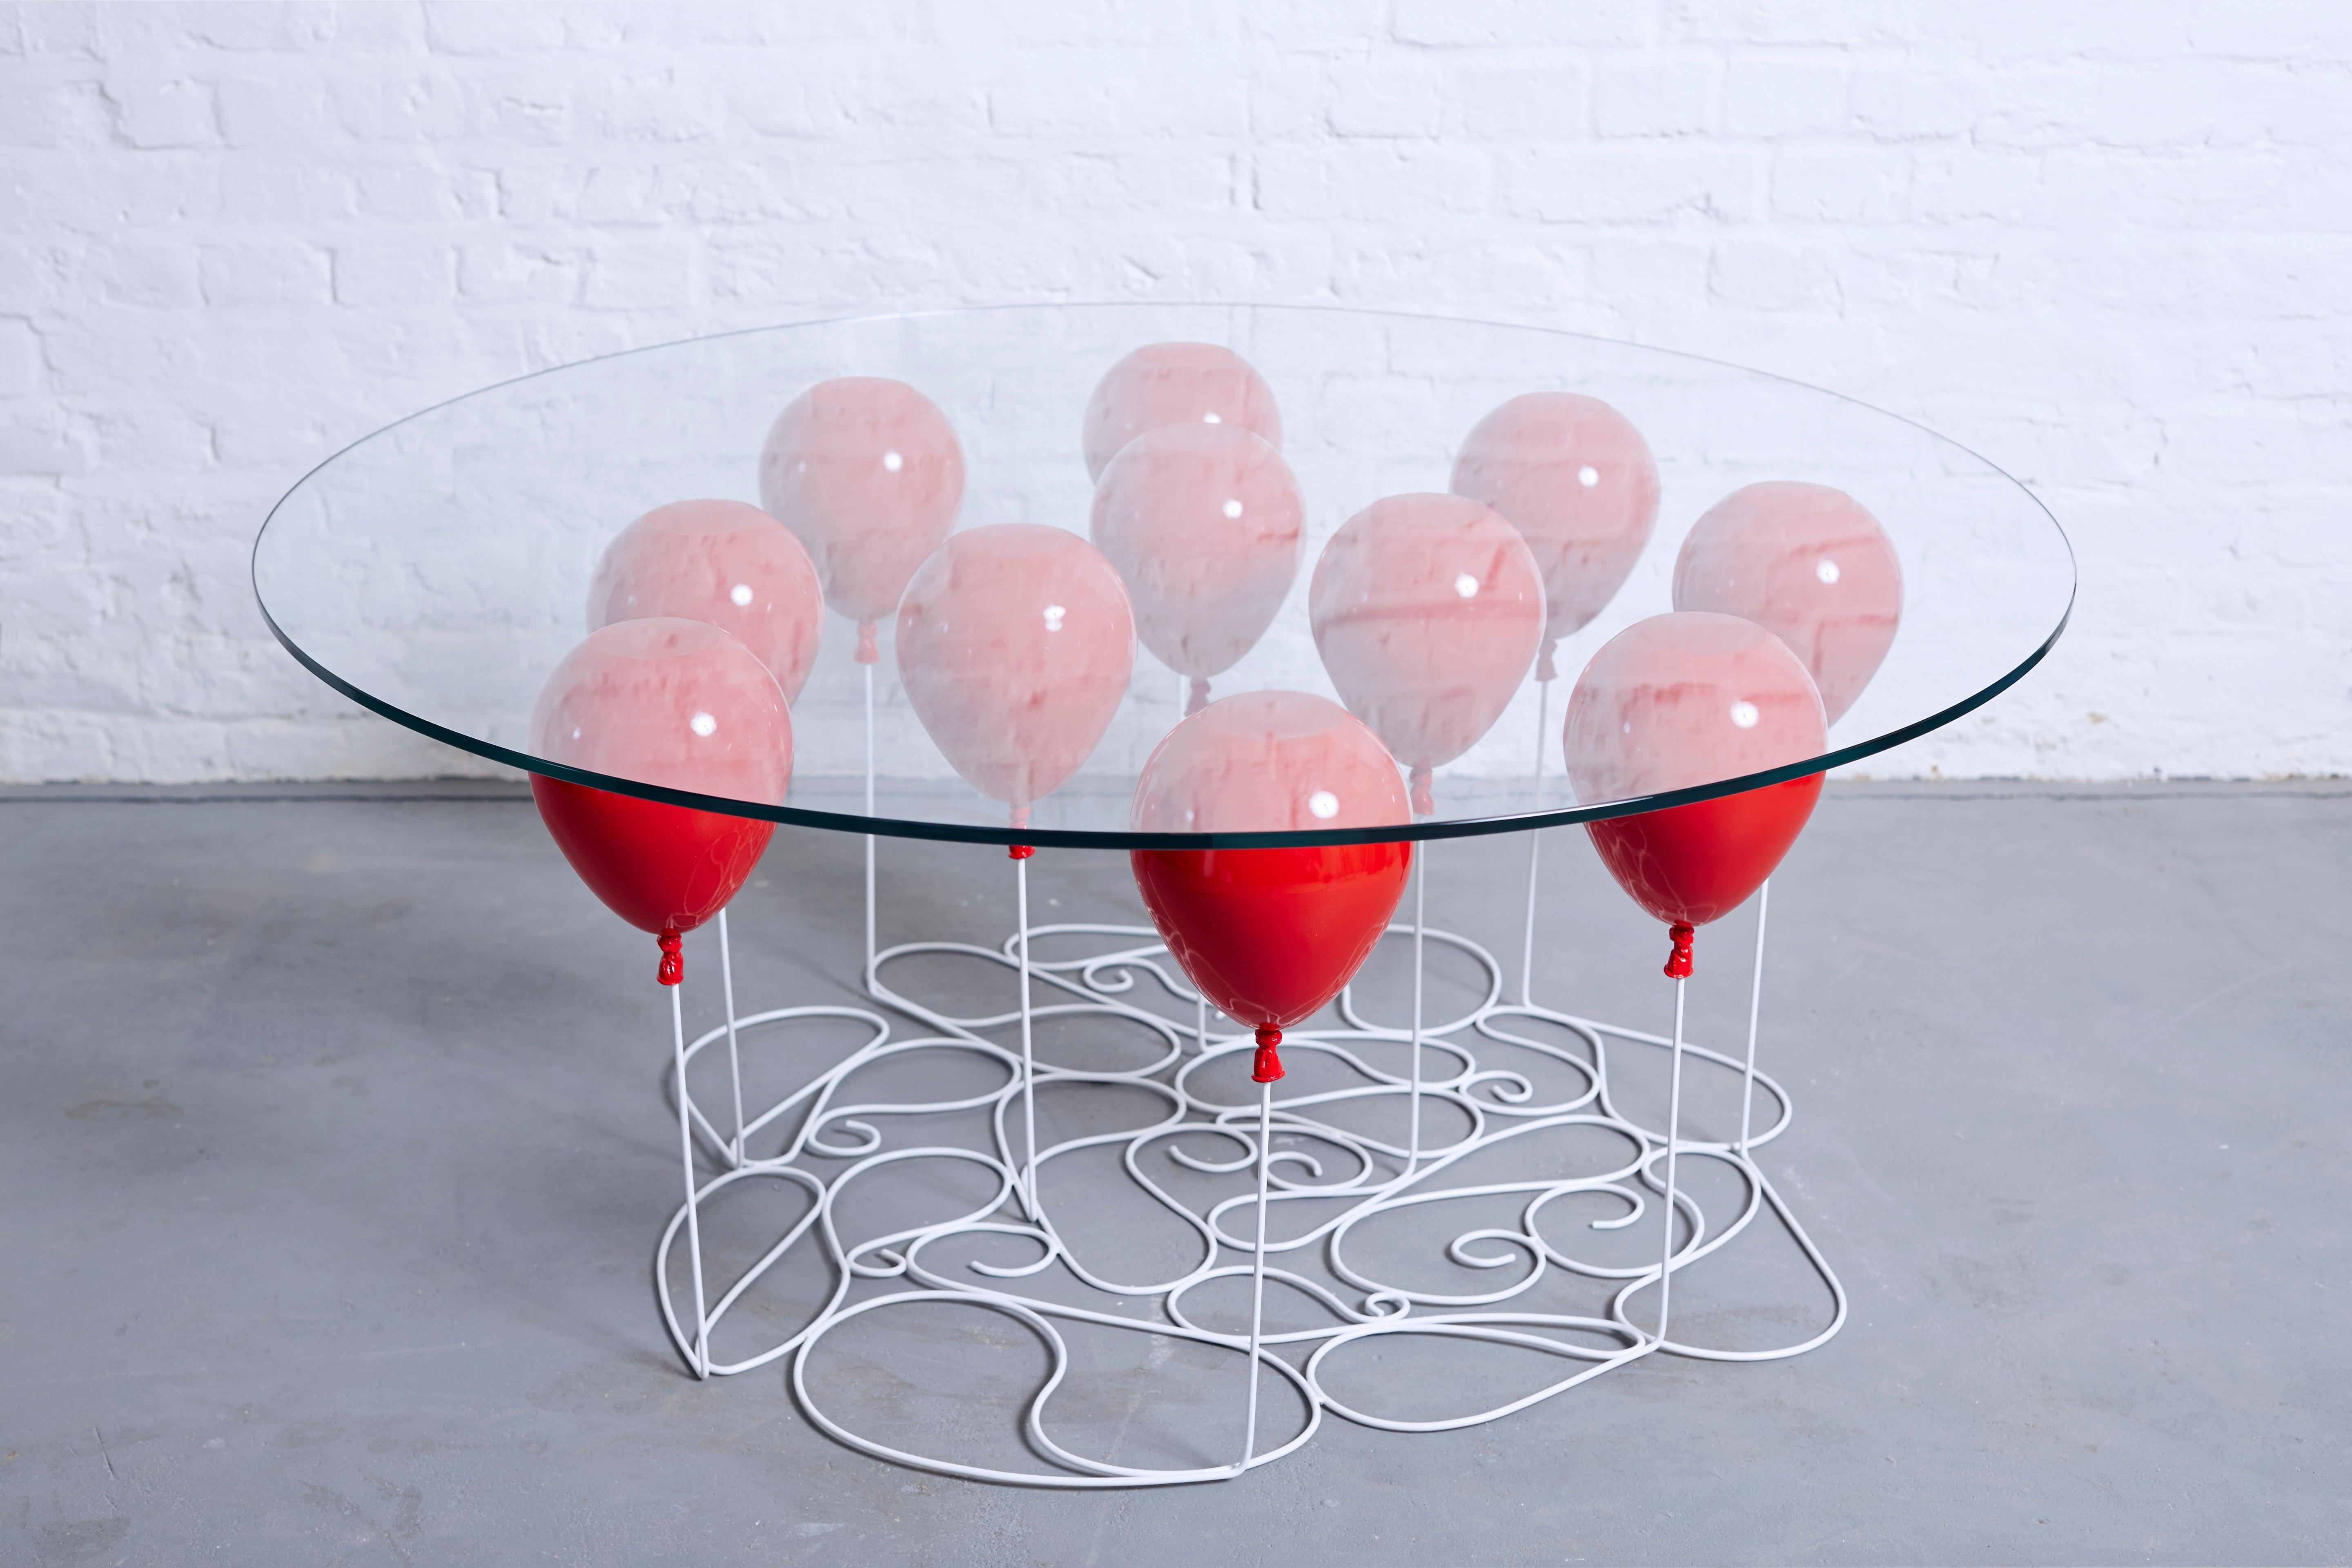 The UP Balloon Coffee Table is a playful trompe l’oeil with gold and silver balloons impressing the illusion of a levitating glass tabletop. 

An uplifting design from acclaimed British designer Christpher Duffy that captures the imagination,